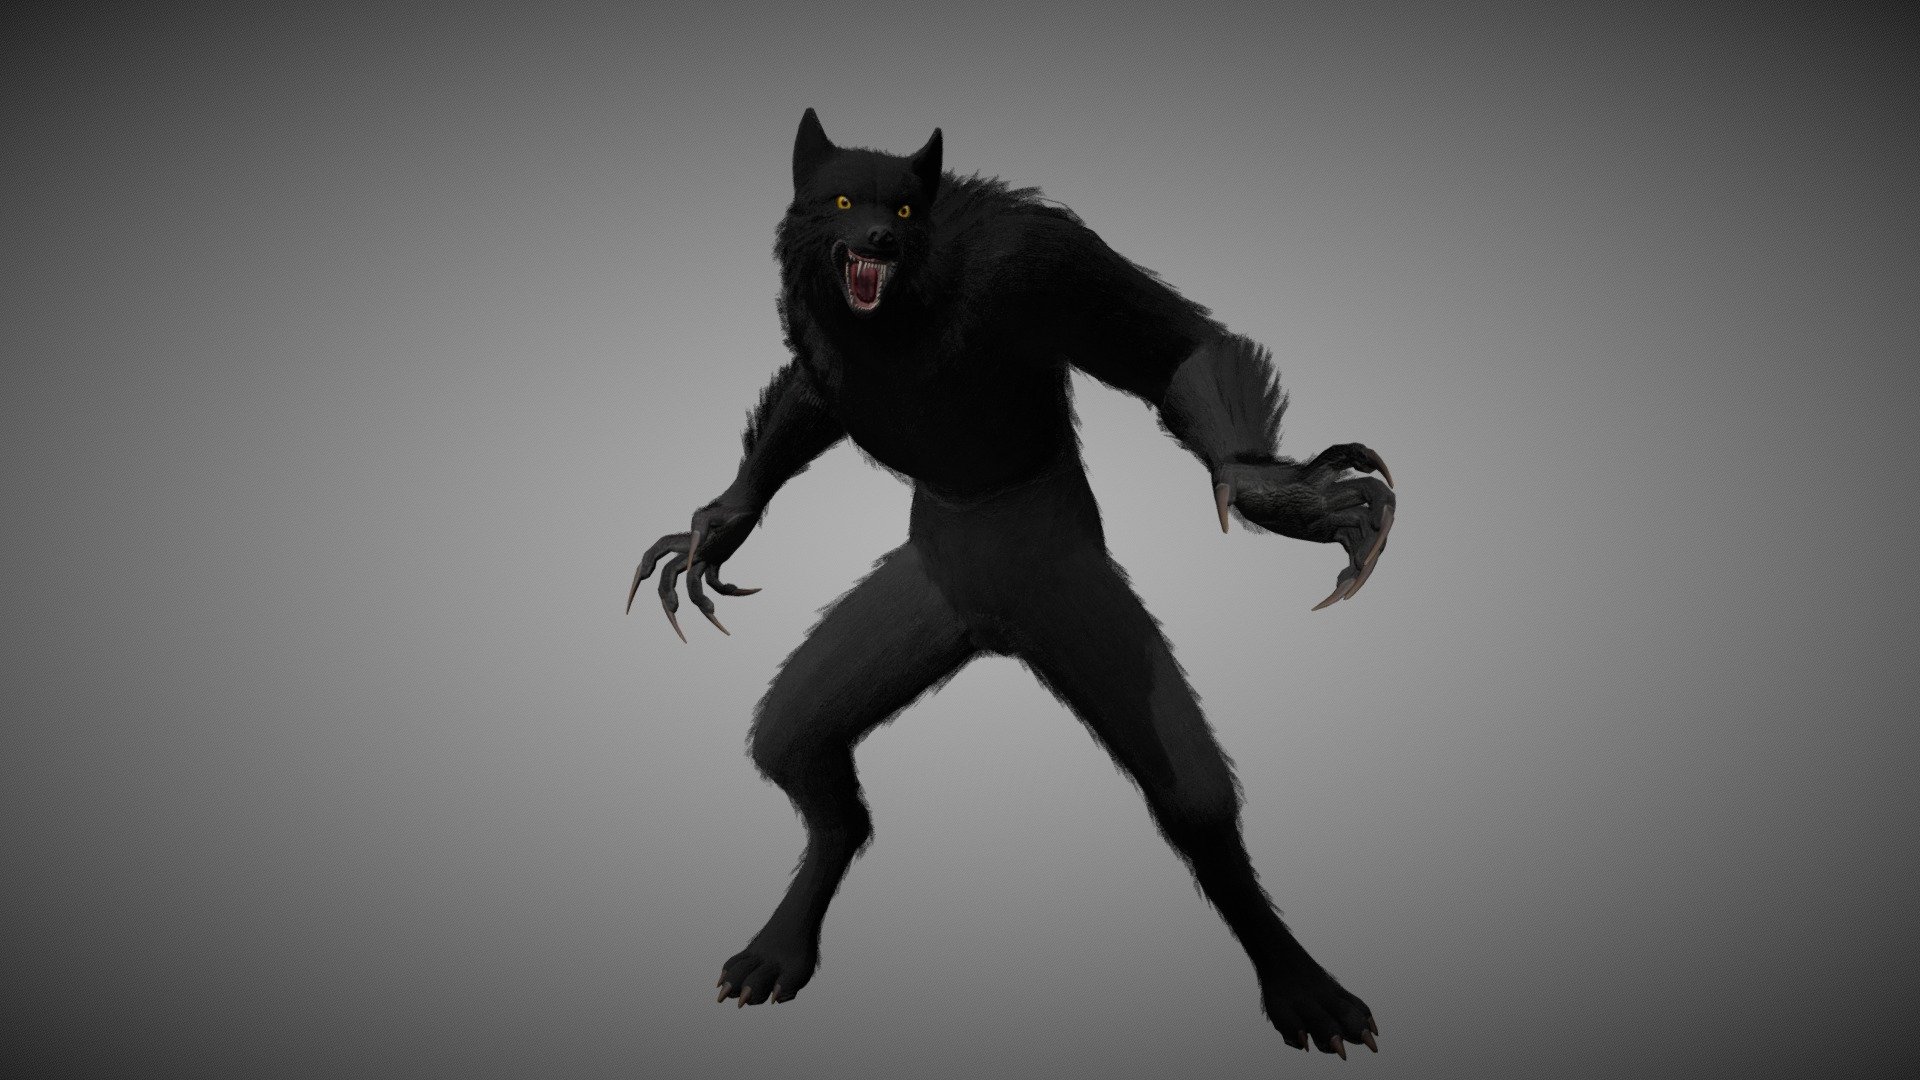 【Werewolf】

Animation List



Idle

Attack

Sneak Forth

Walk Forth

Move Forth

Hitted Disrupt

Hitted KnockBack

Hitted FlyingBack

Die


Artstation:https://www.artstation.com/artwork/4bnD2W - Werewolf - 3D model by Shao Xii (@shaoxii) 3d model